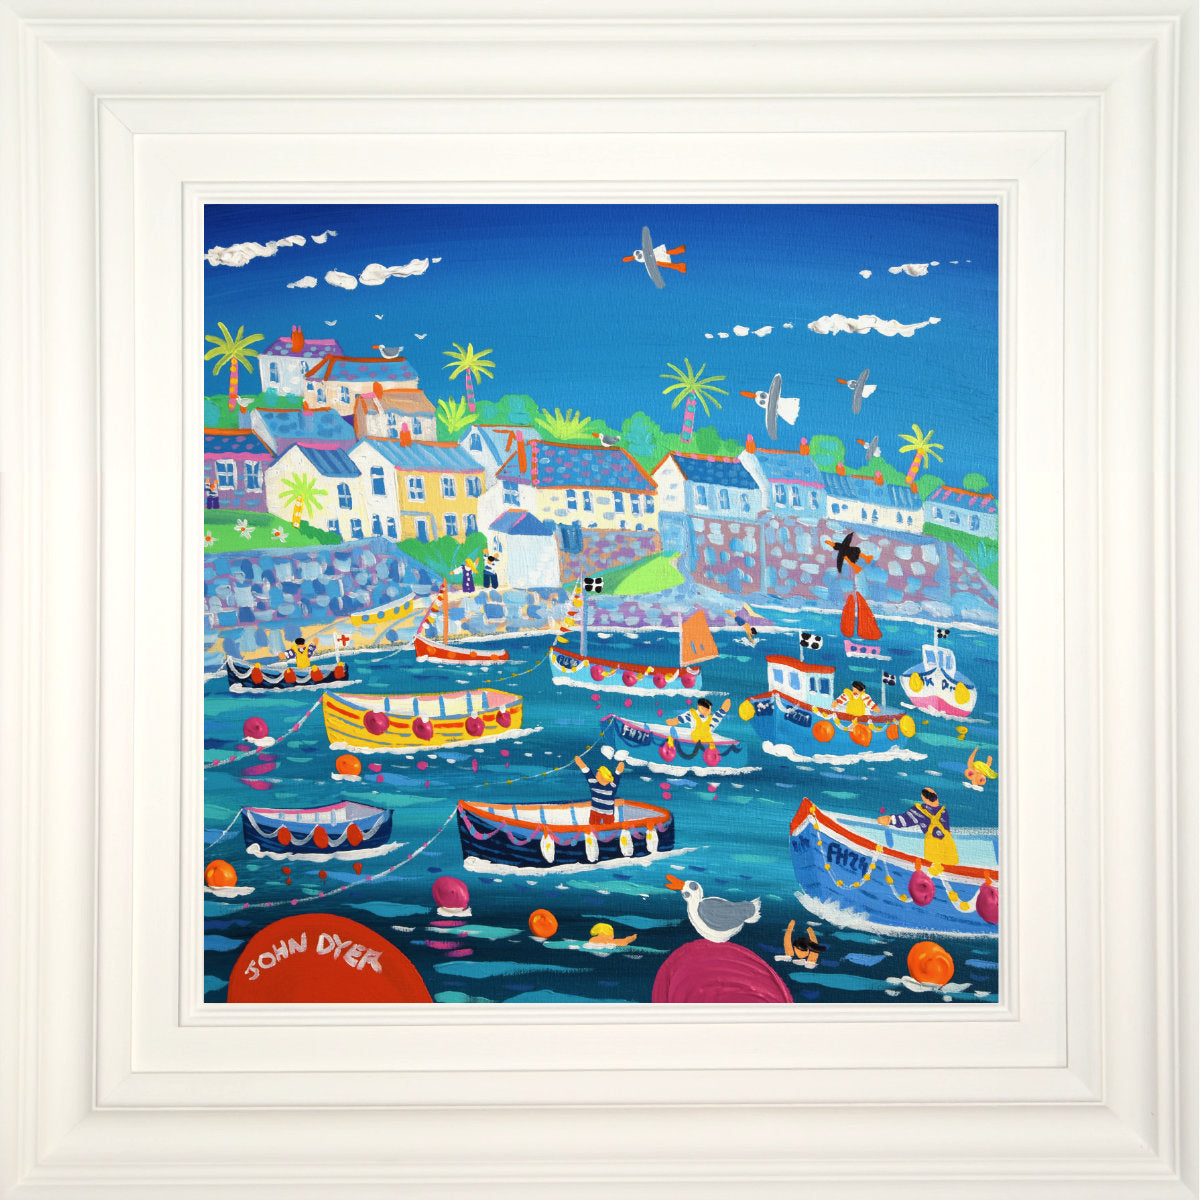 'High Tide in the Harbour, Coverack', 18x18 inches acrylic on canvas. Cornish Coastal Art Painting by British Artist John Dyer.